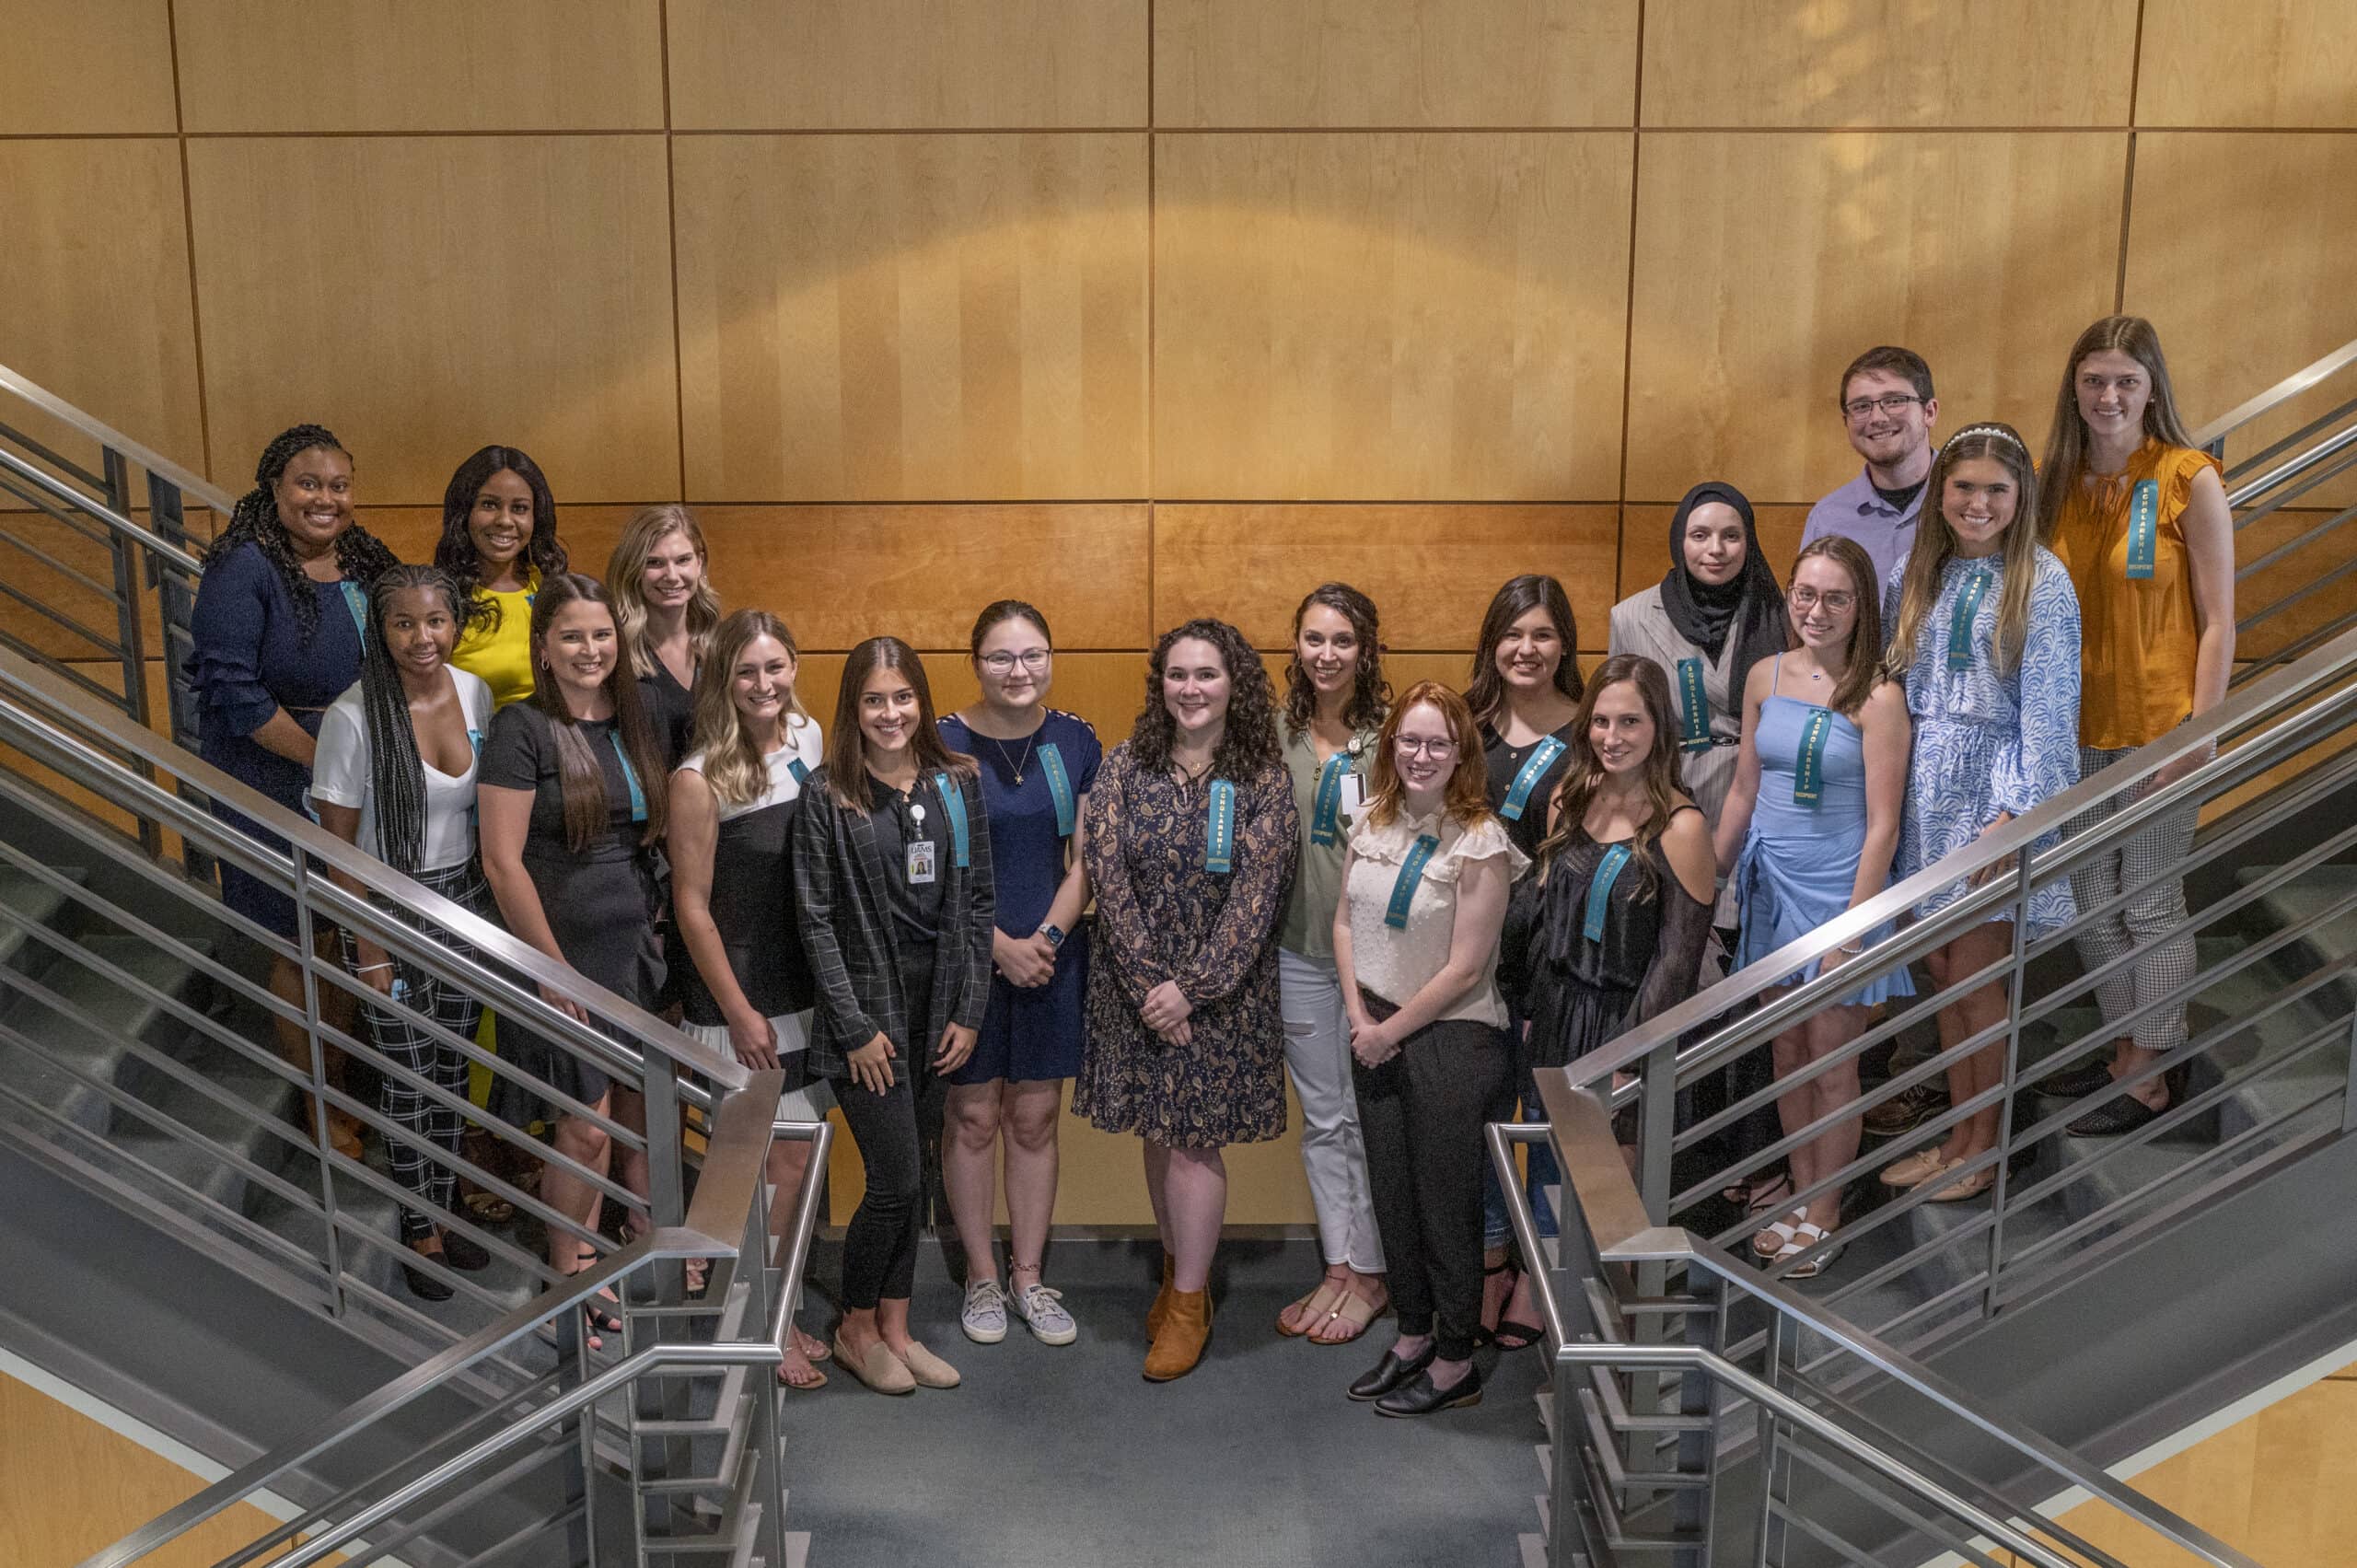 The recipients of College of Health Professions student scholarships gather on a staircase in the Rahn Building after the scholarship reception honoring them.